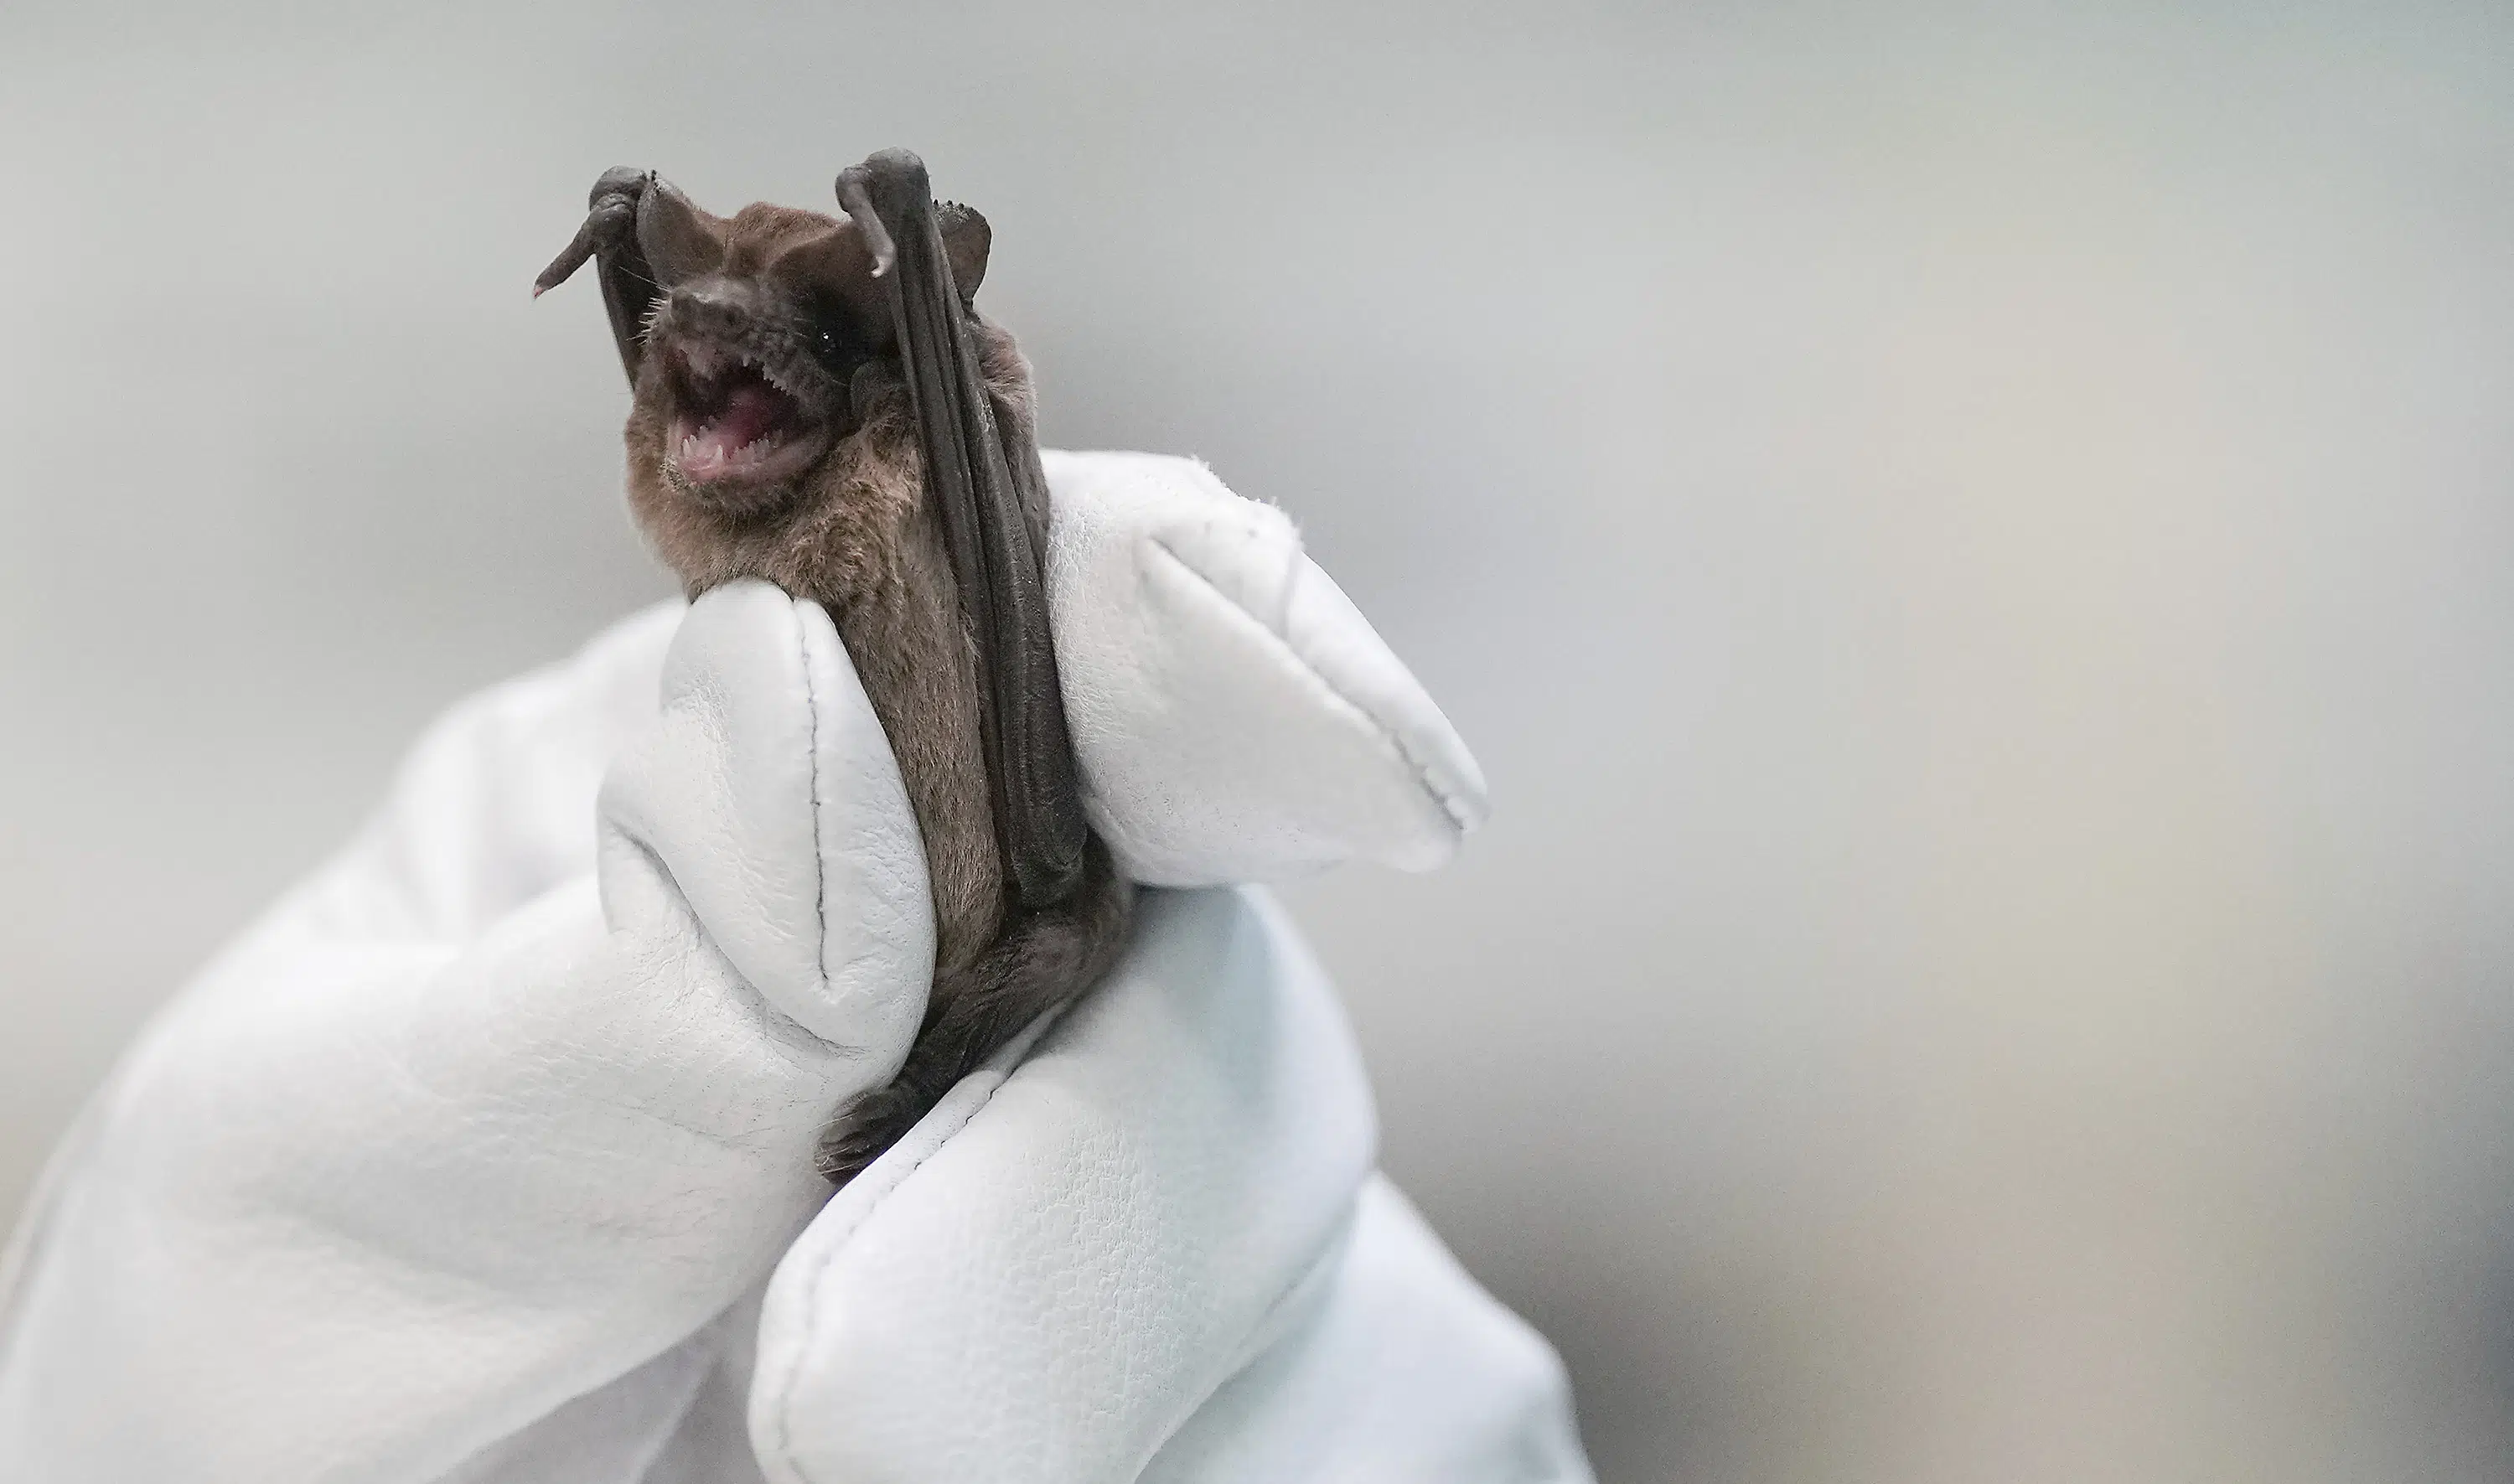 Bats plunge to ground in cold; saved by incubators, fluids